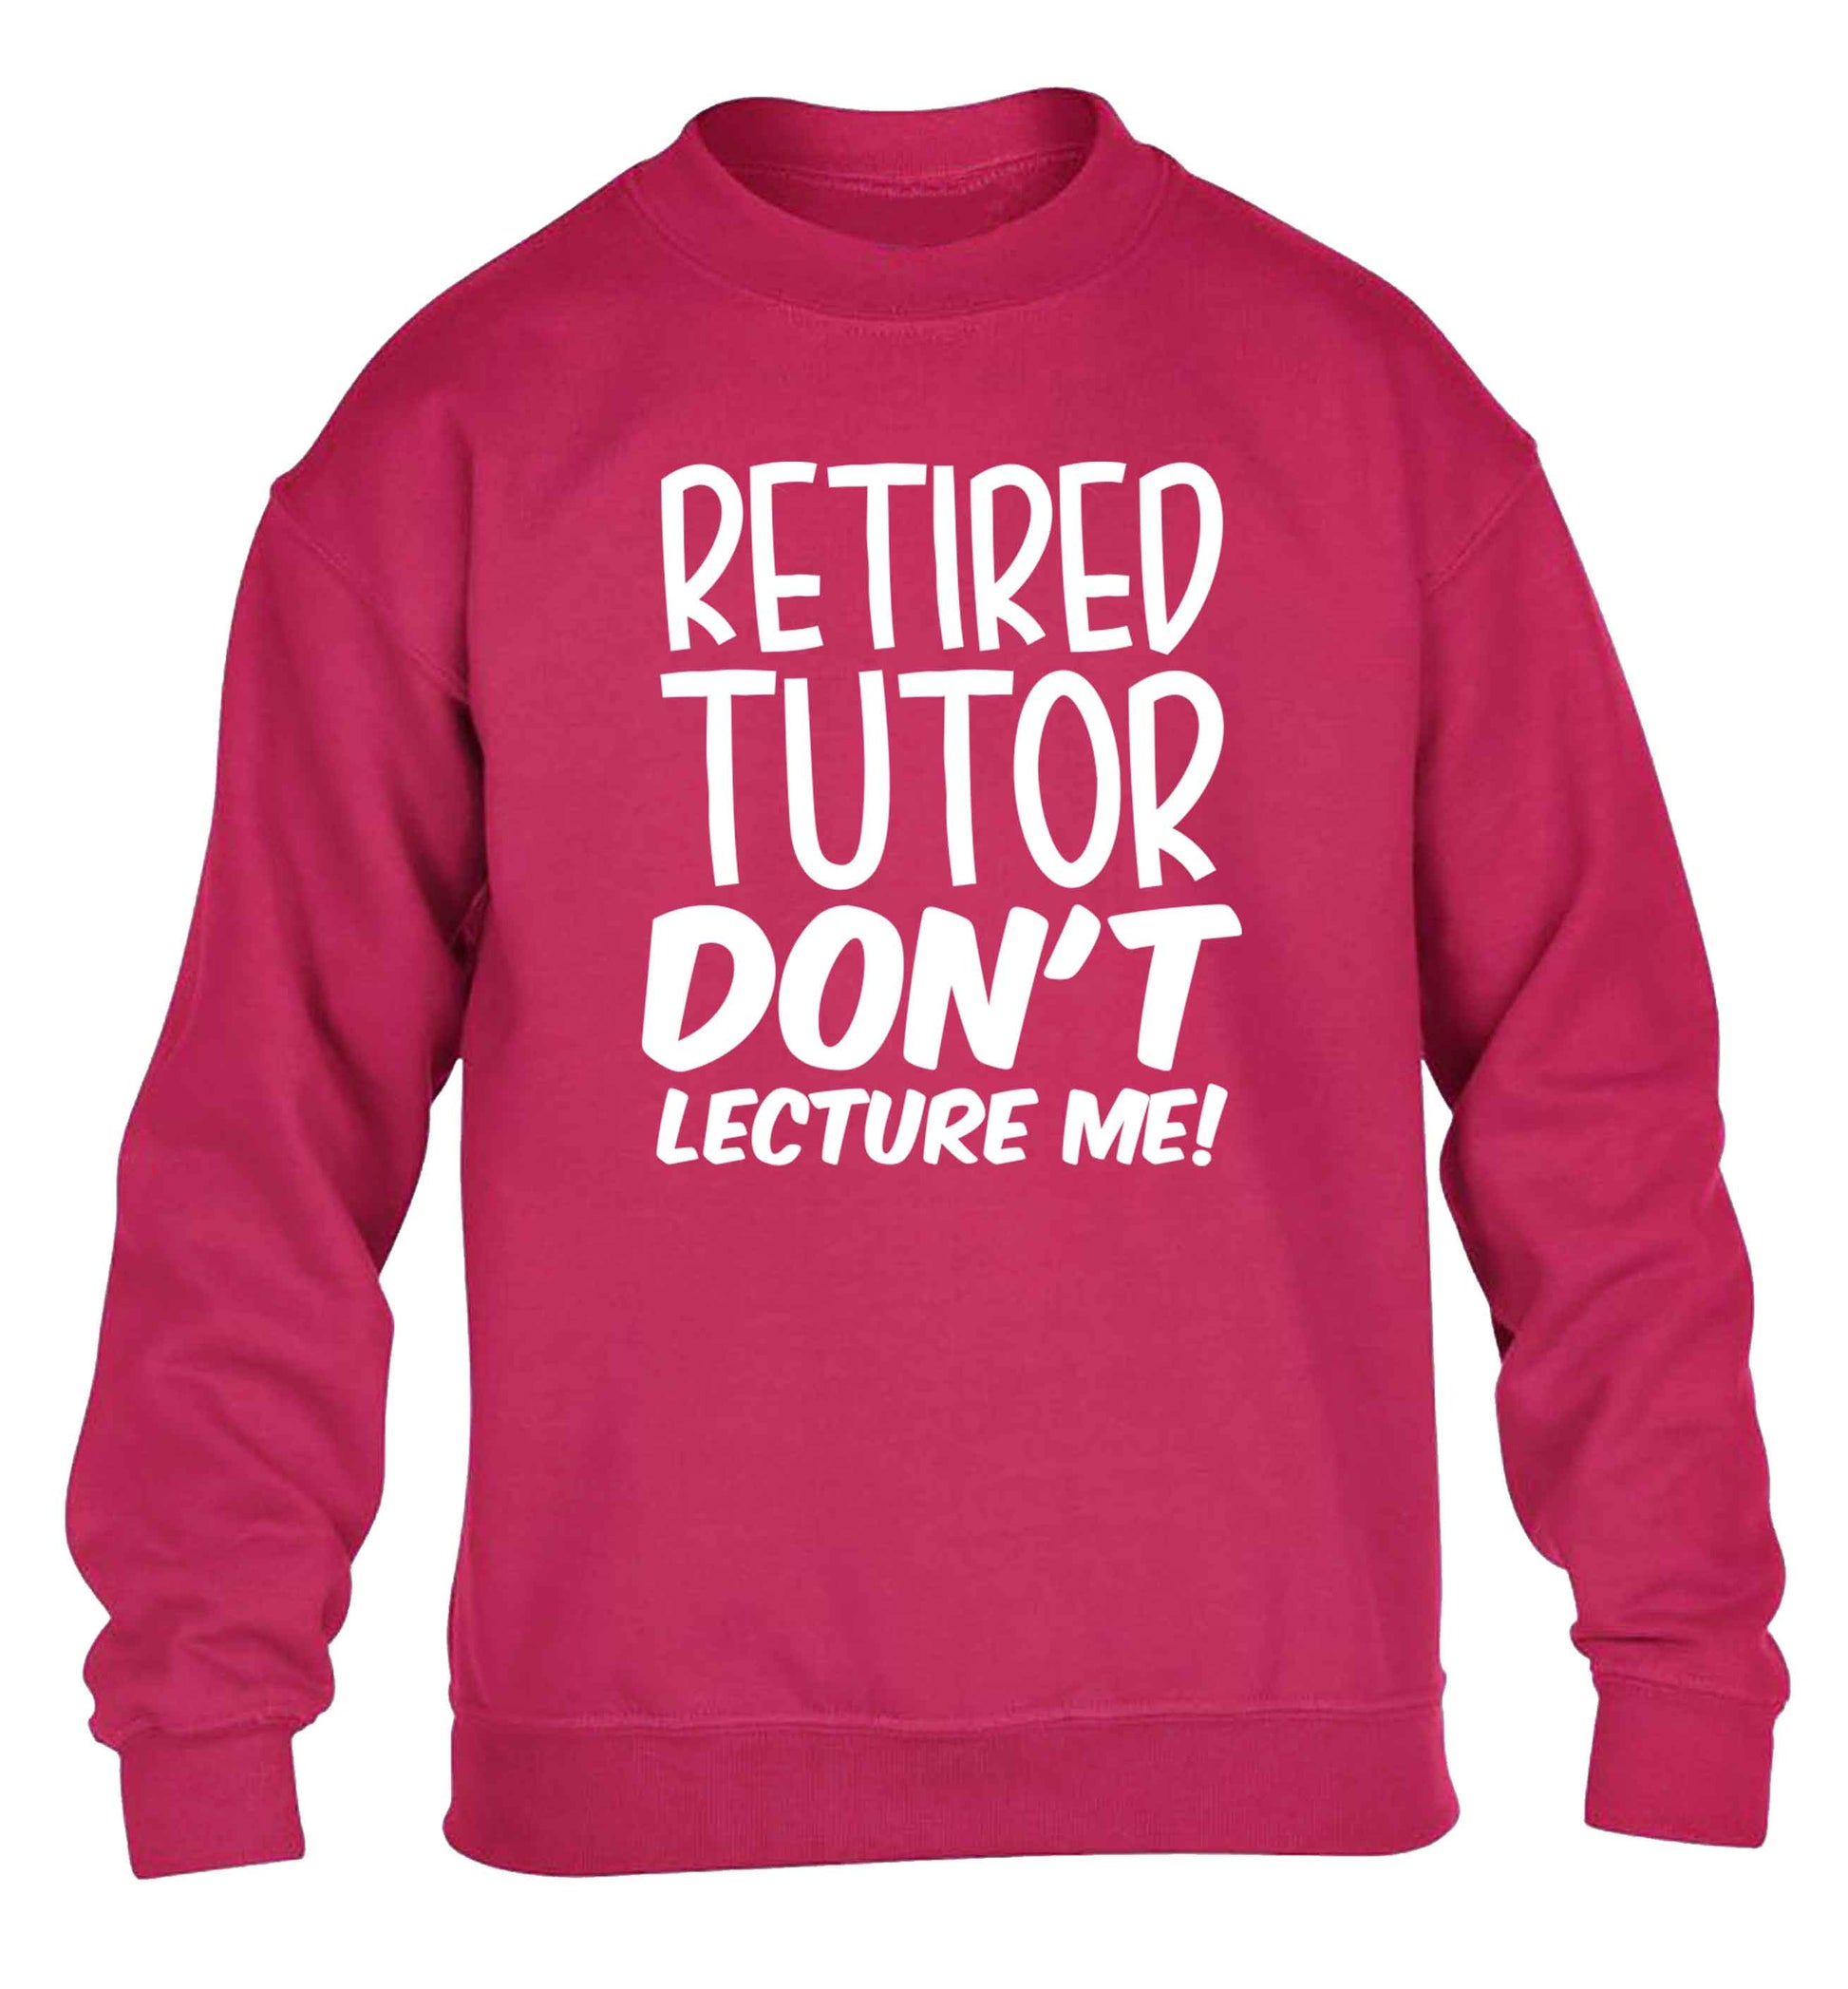 Retired tutor don't lecture me! children's pink sweater 12-13 Years